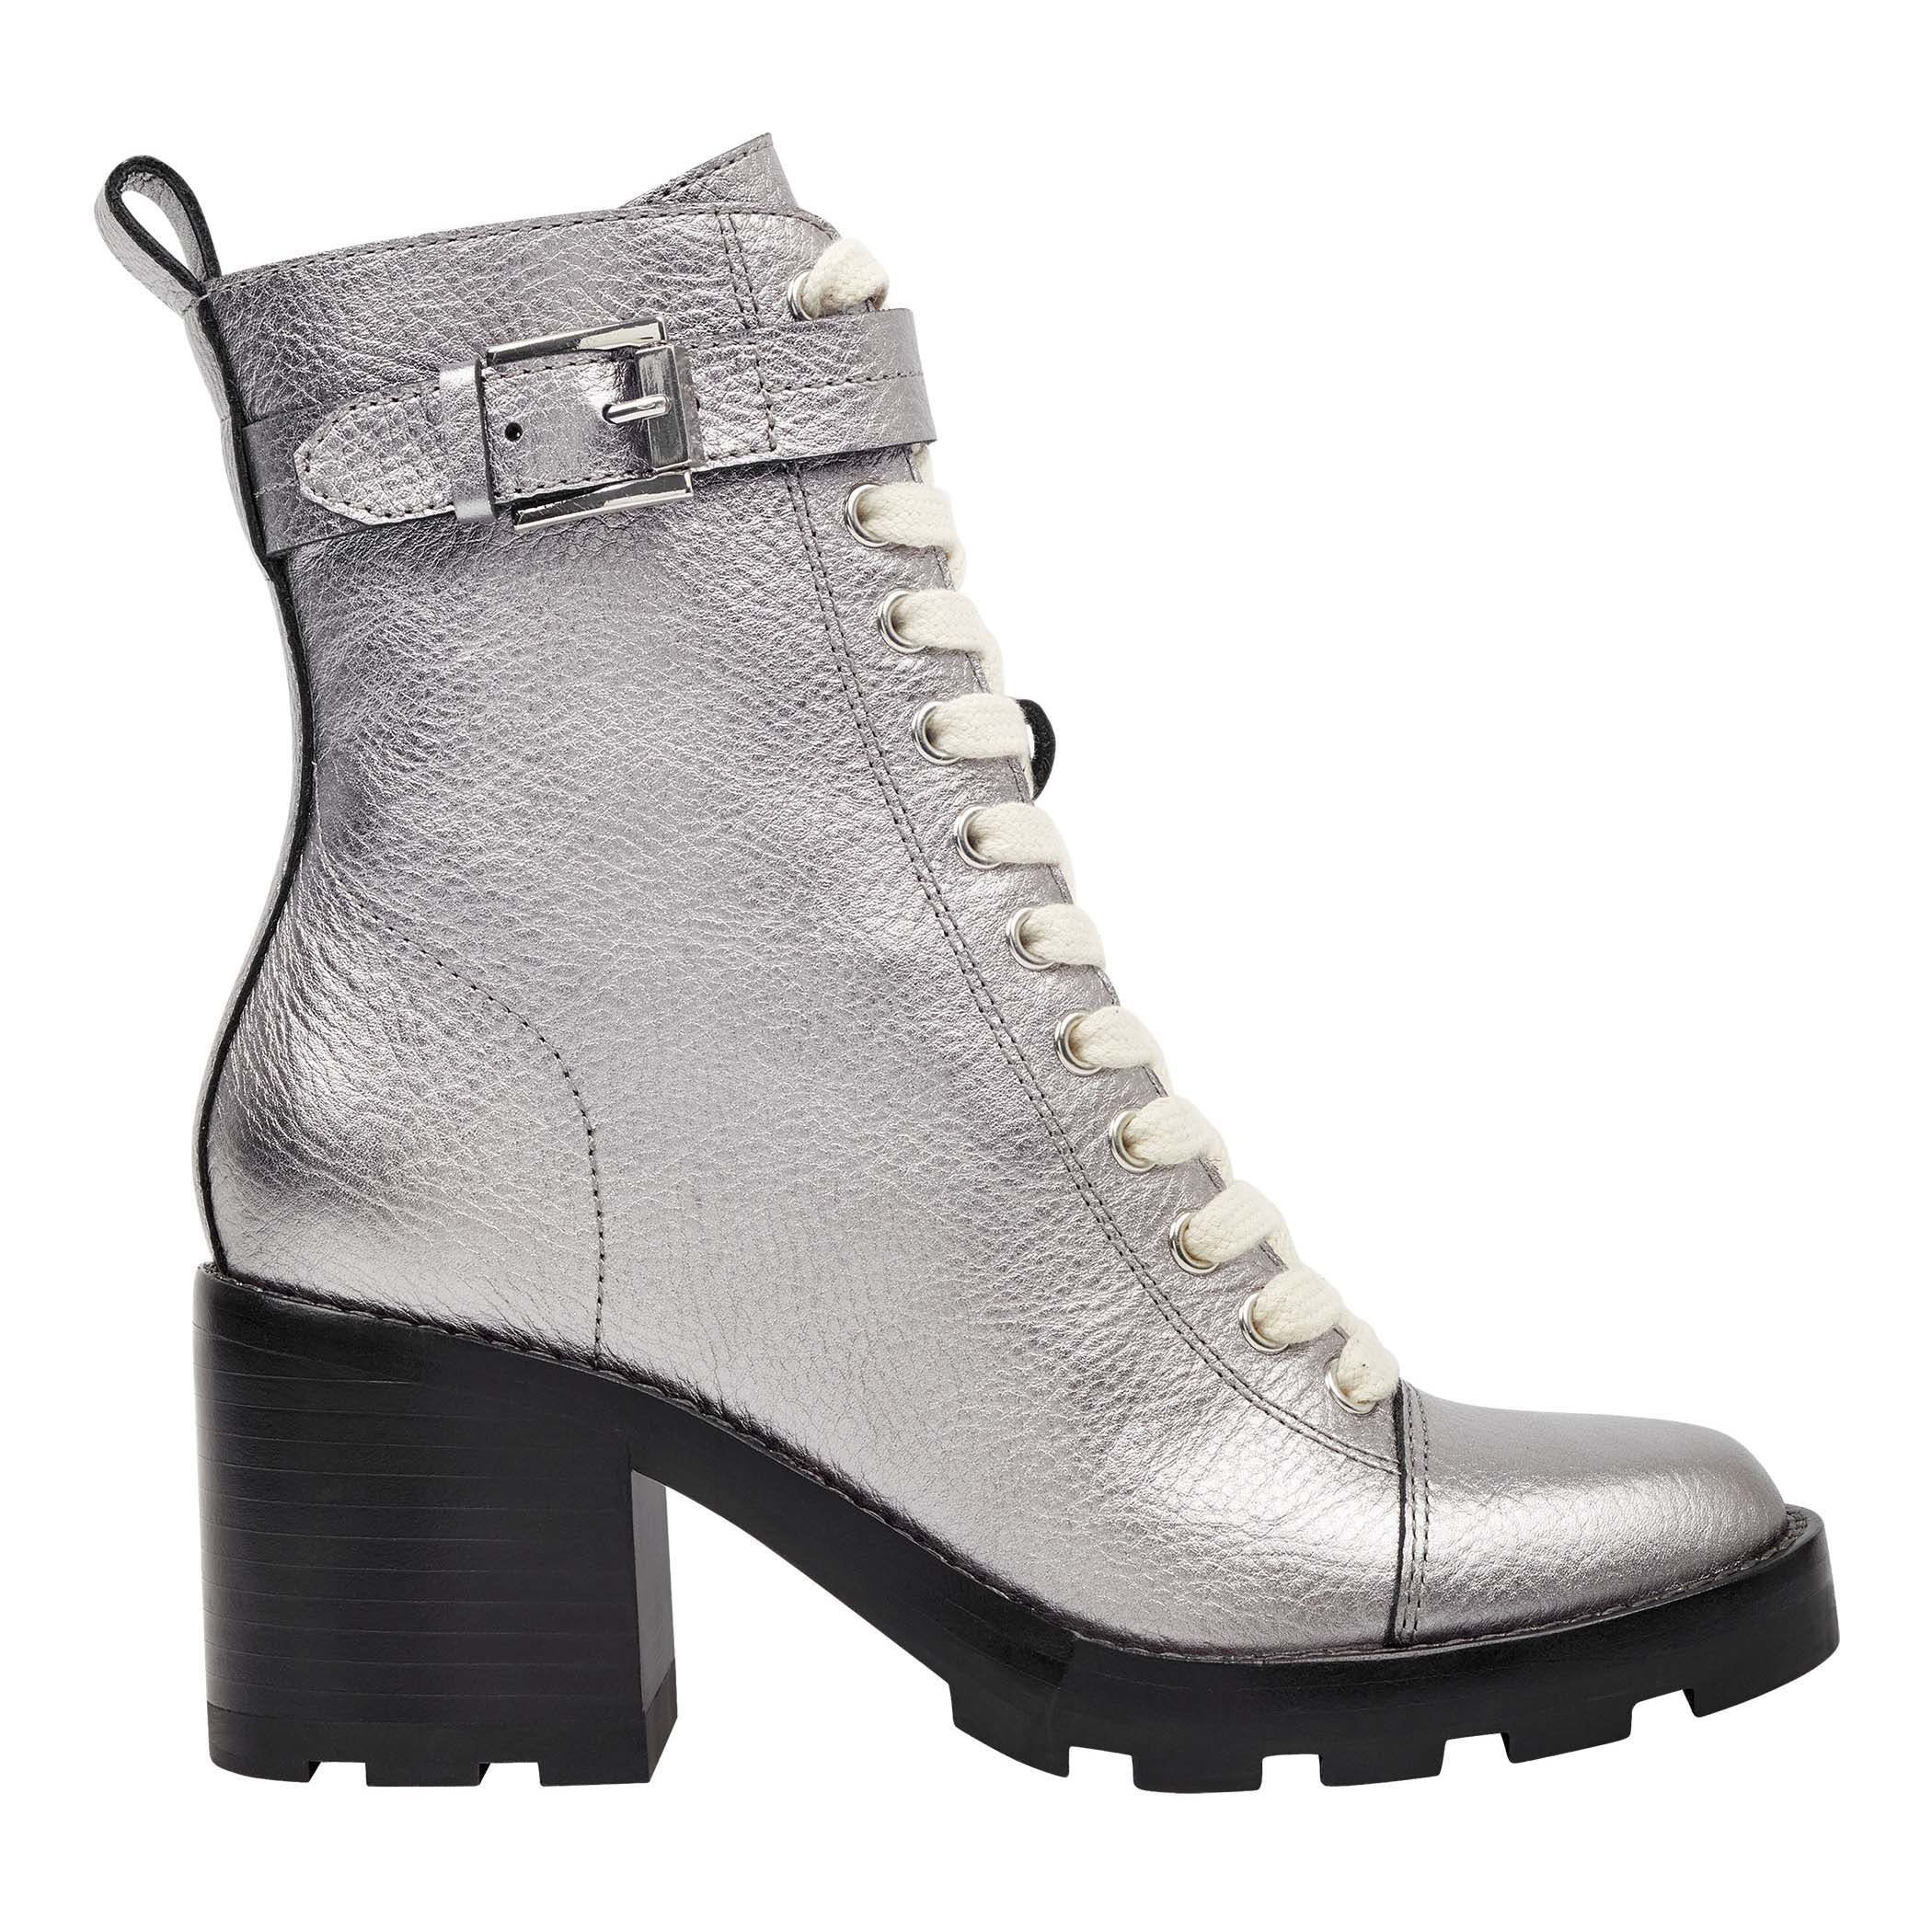 16 Stylish Combat Booties to Step into 